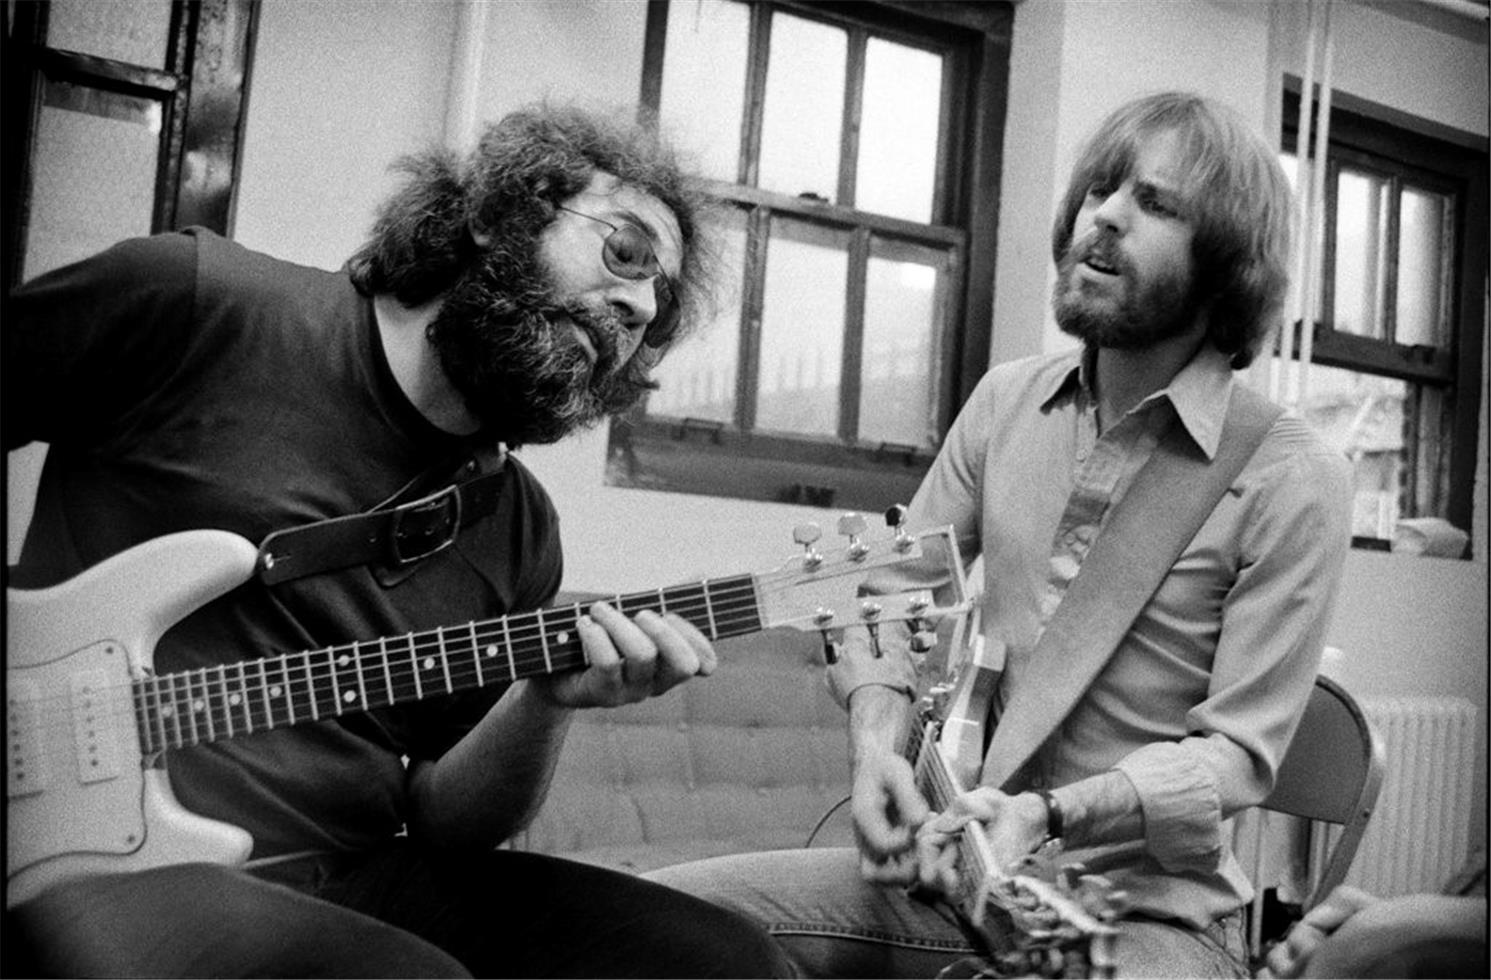 Peter Simon Black and White Photograph - Jerry Garcia and Bob Weir, Grateful Dead, NY, 1972